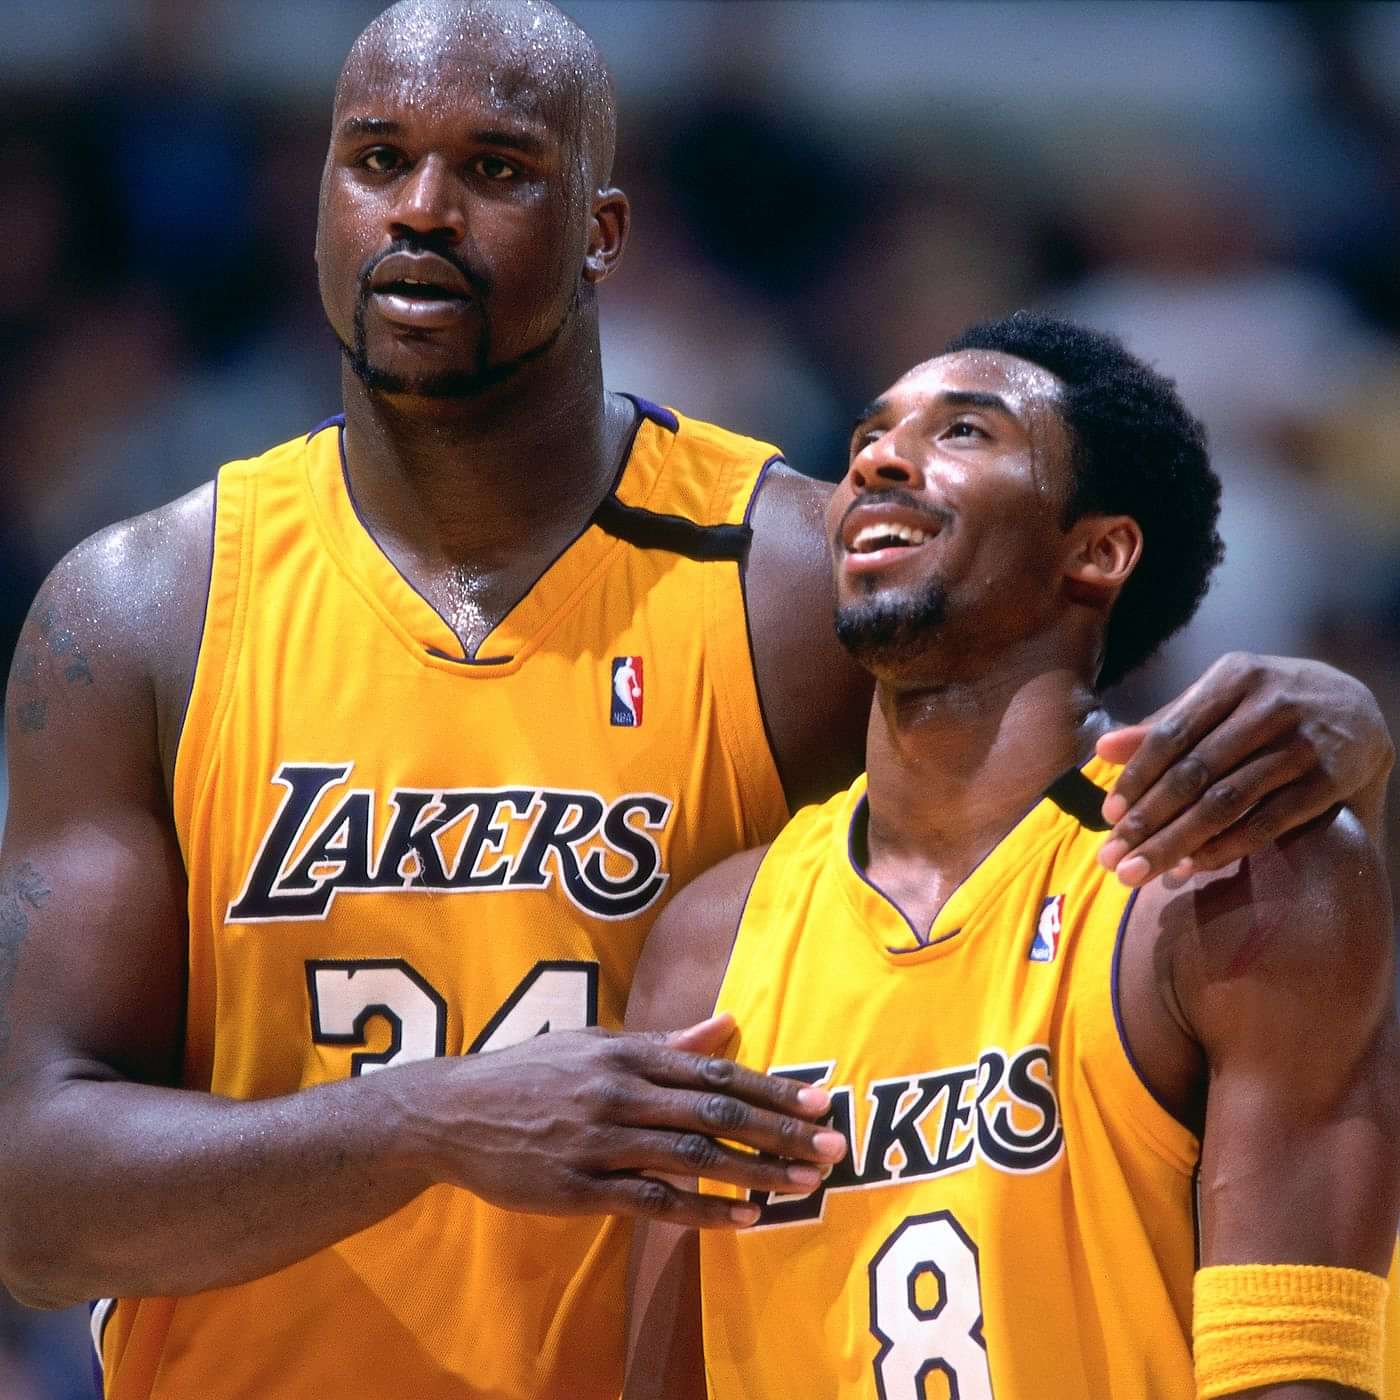 Kobe Bryant, Shaquille O'Neal, and those infamous playoff air